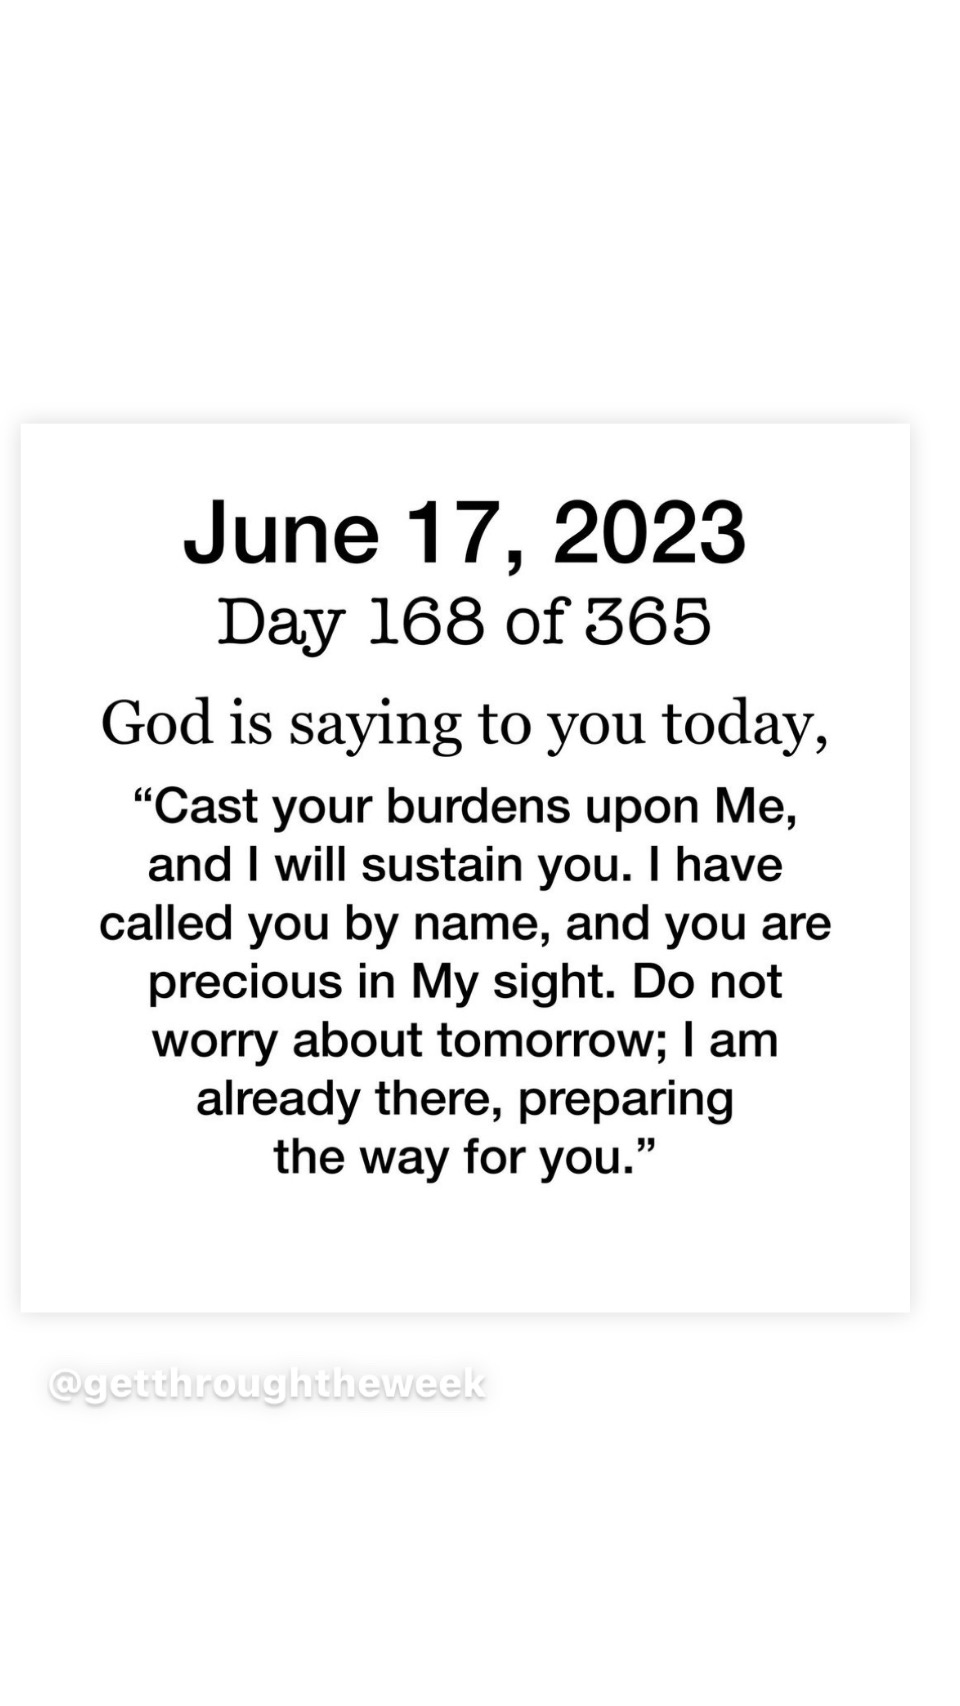 Cast your burdens upon Me, and i will sustain you. I have called you by name, and you are precious in MY sight. Do not worry about tomorrow; i am already there, preparing the say for you."